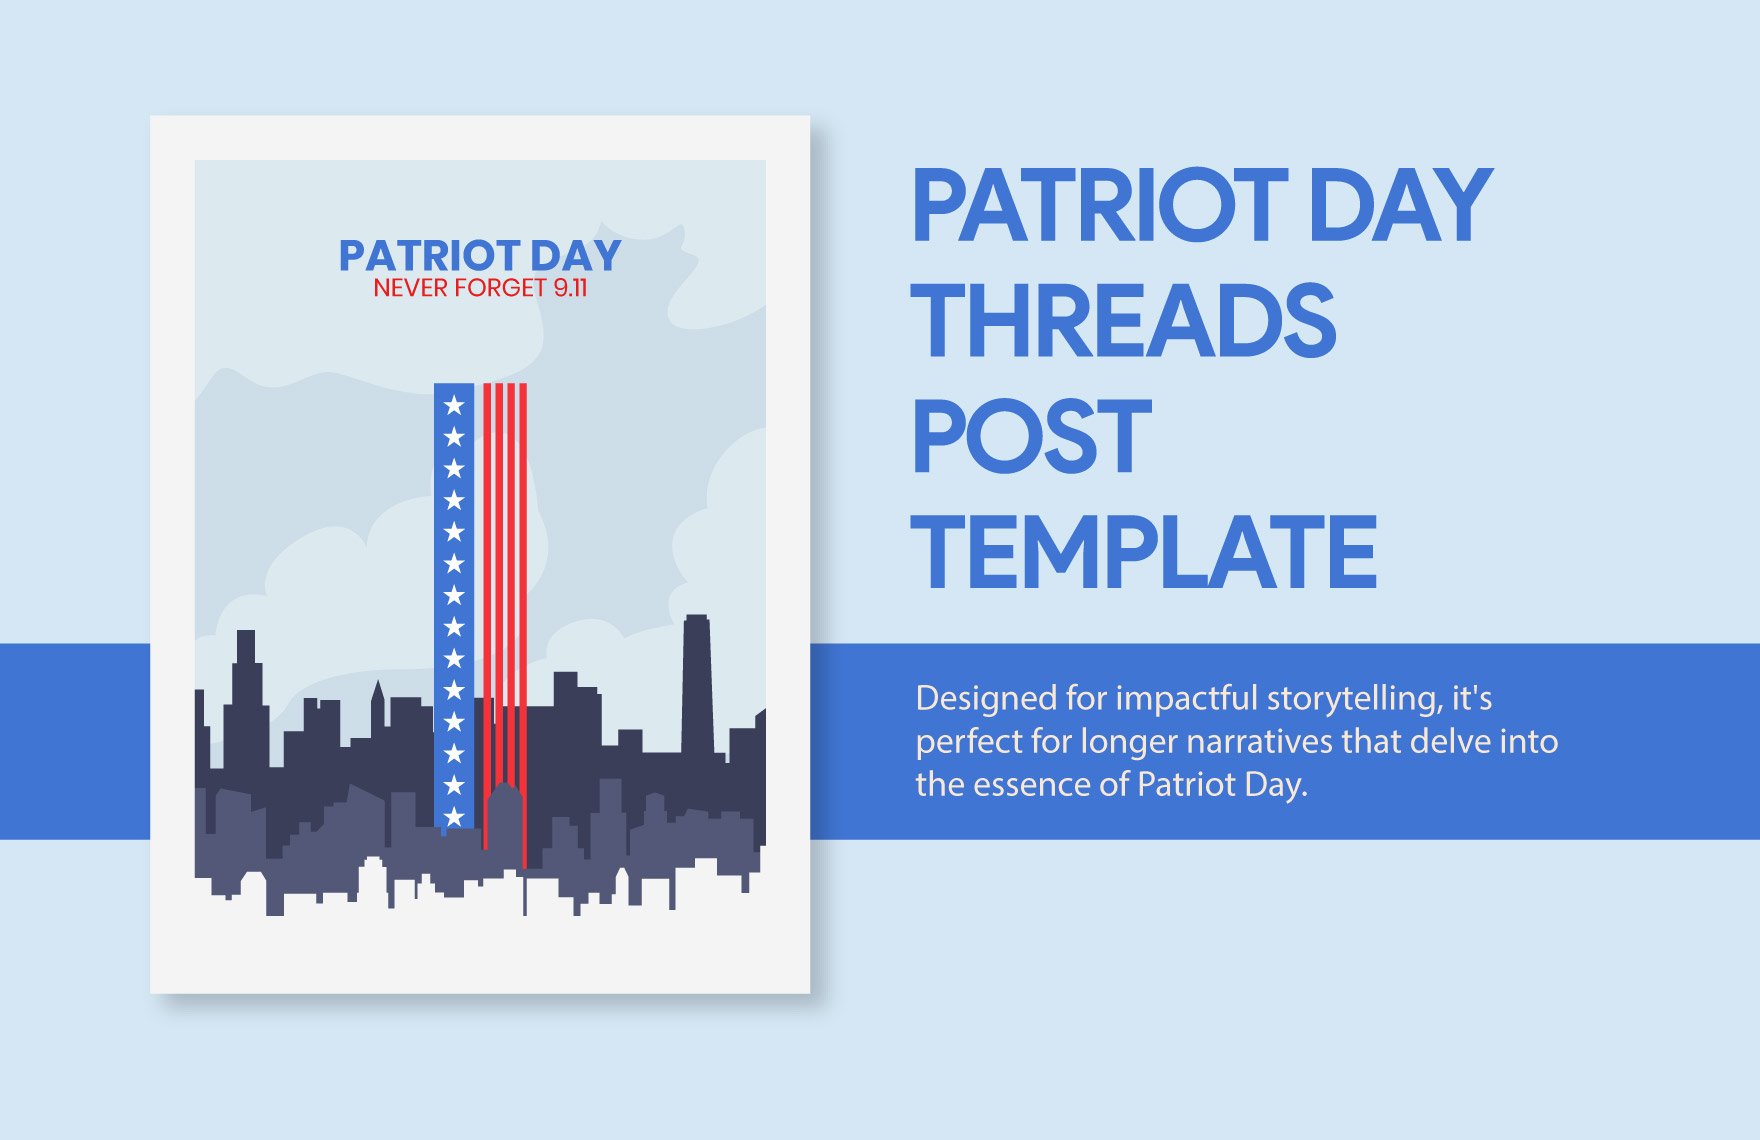 Patriot Day Threads Post Template